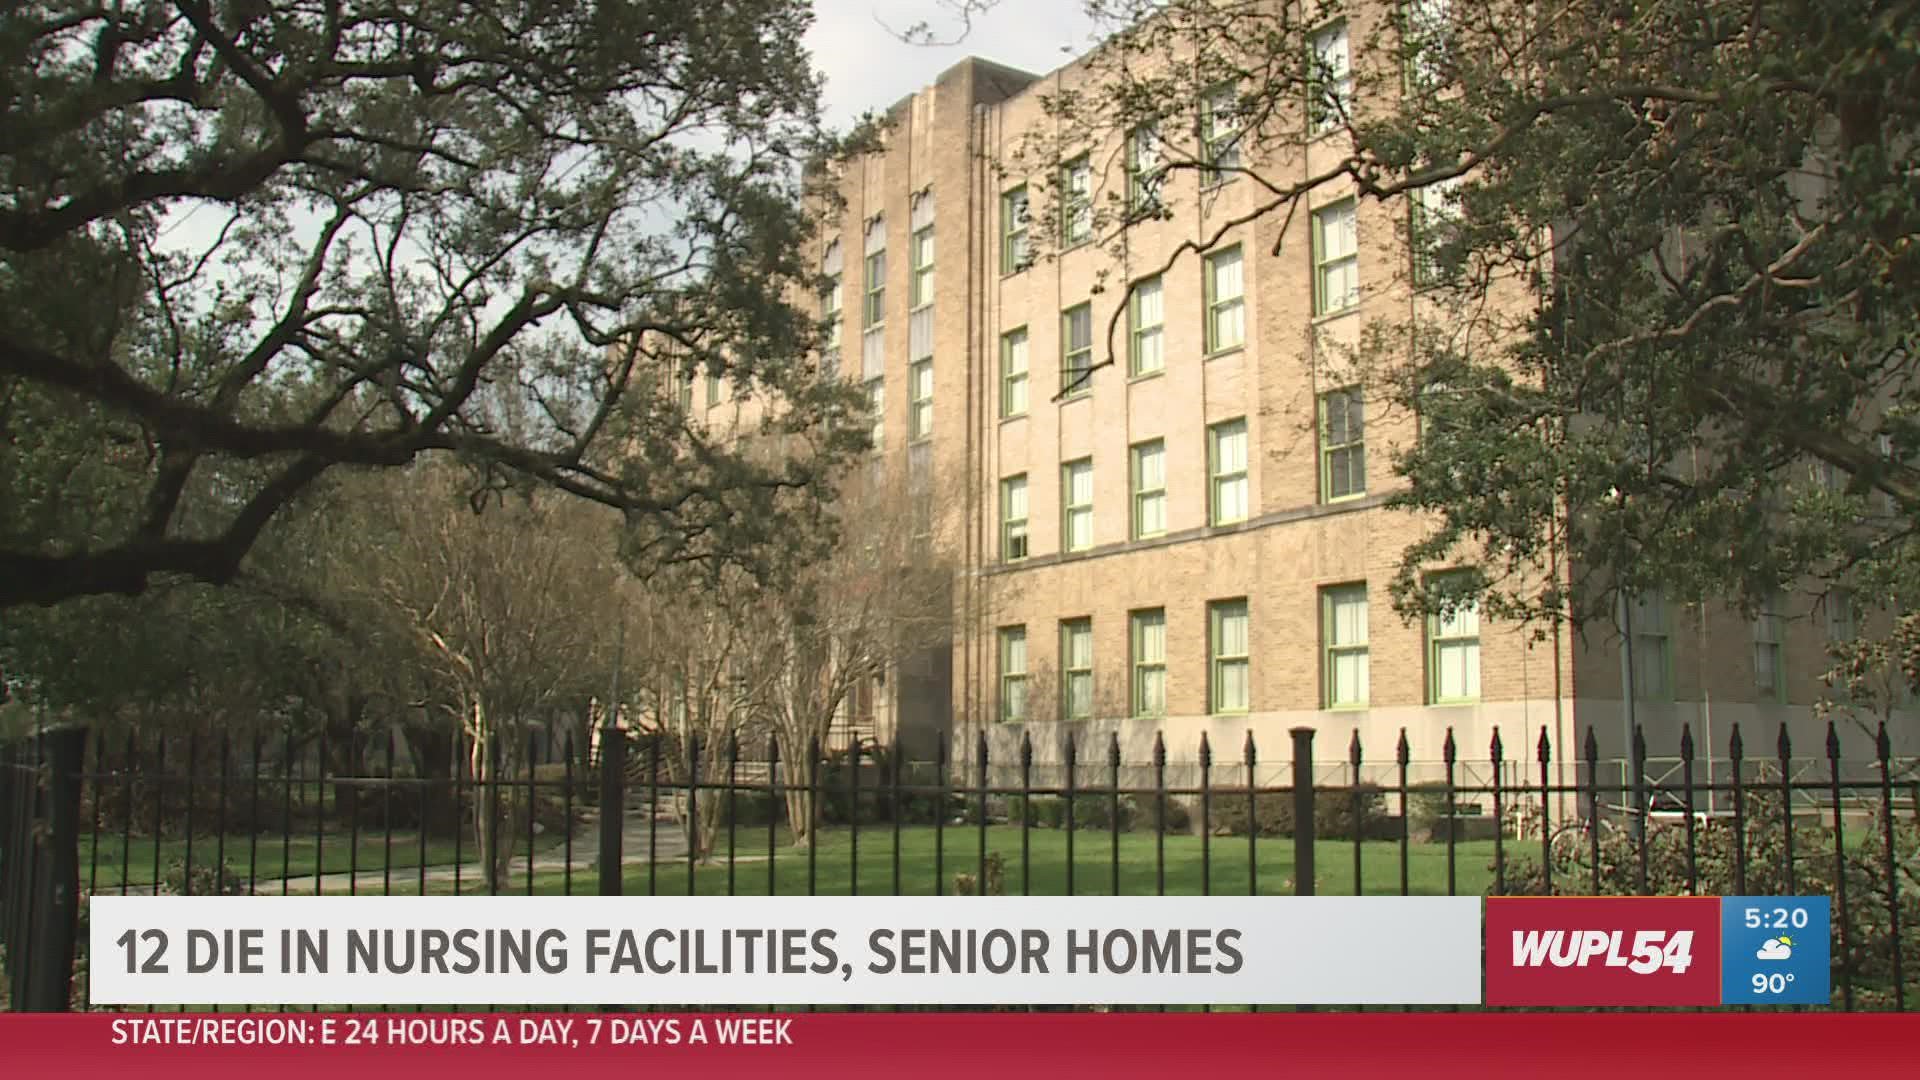 It's been confirmed 12 residents have died at nursing facilities and senior homes after Hurricane. New Orleans has evacuated 10 facilities as of Sunday night.